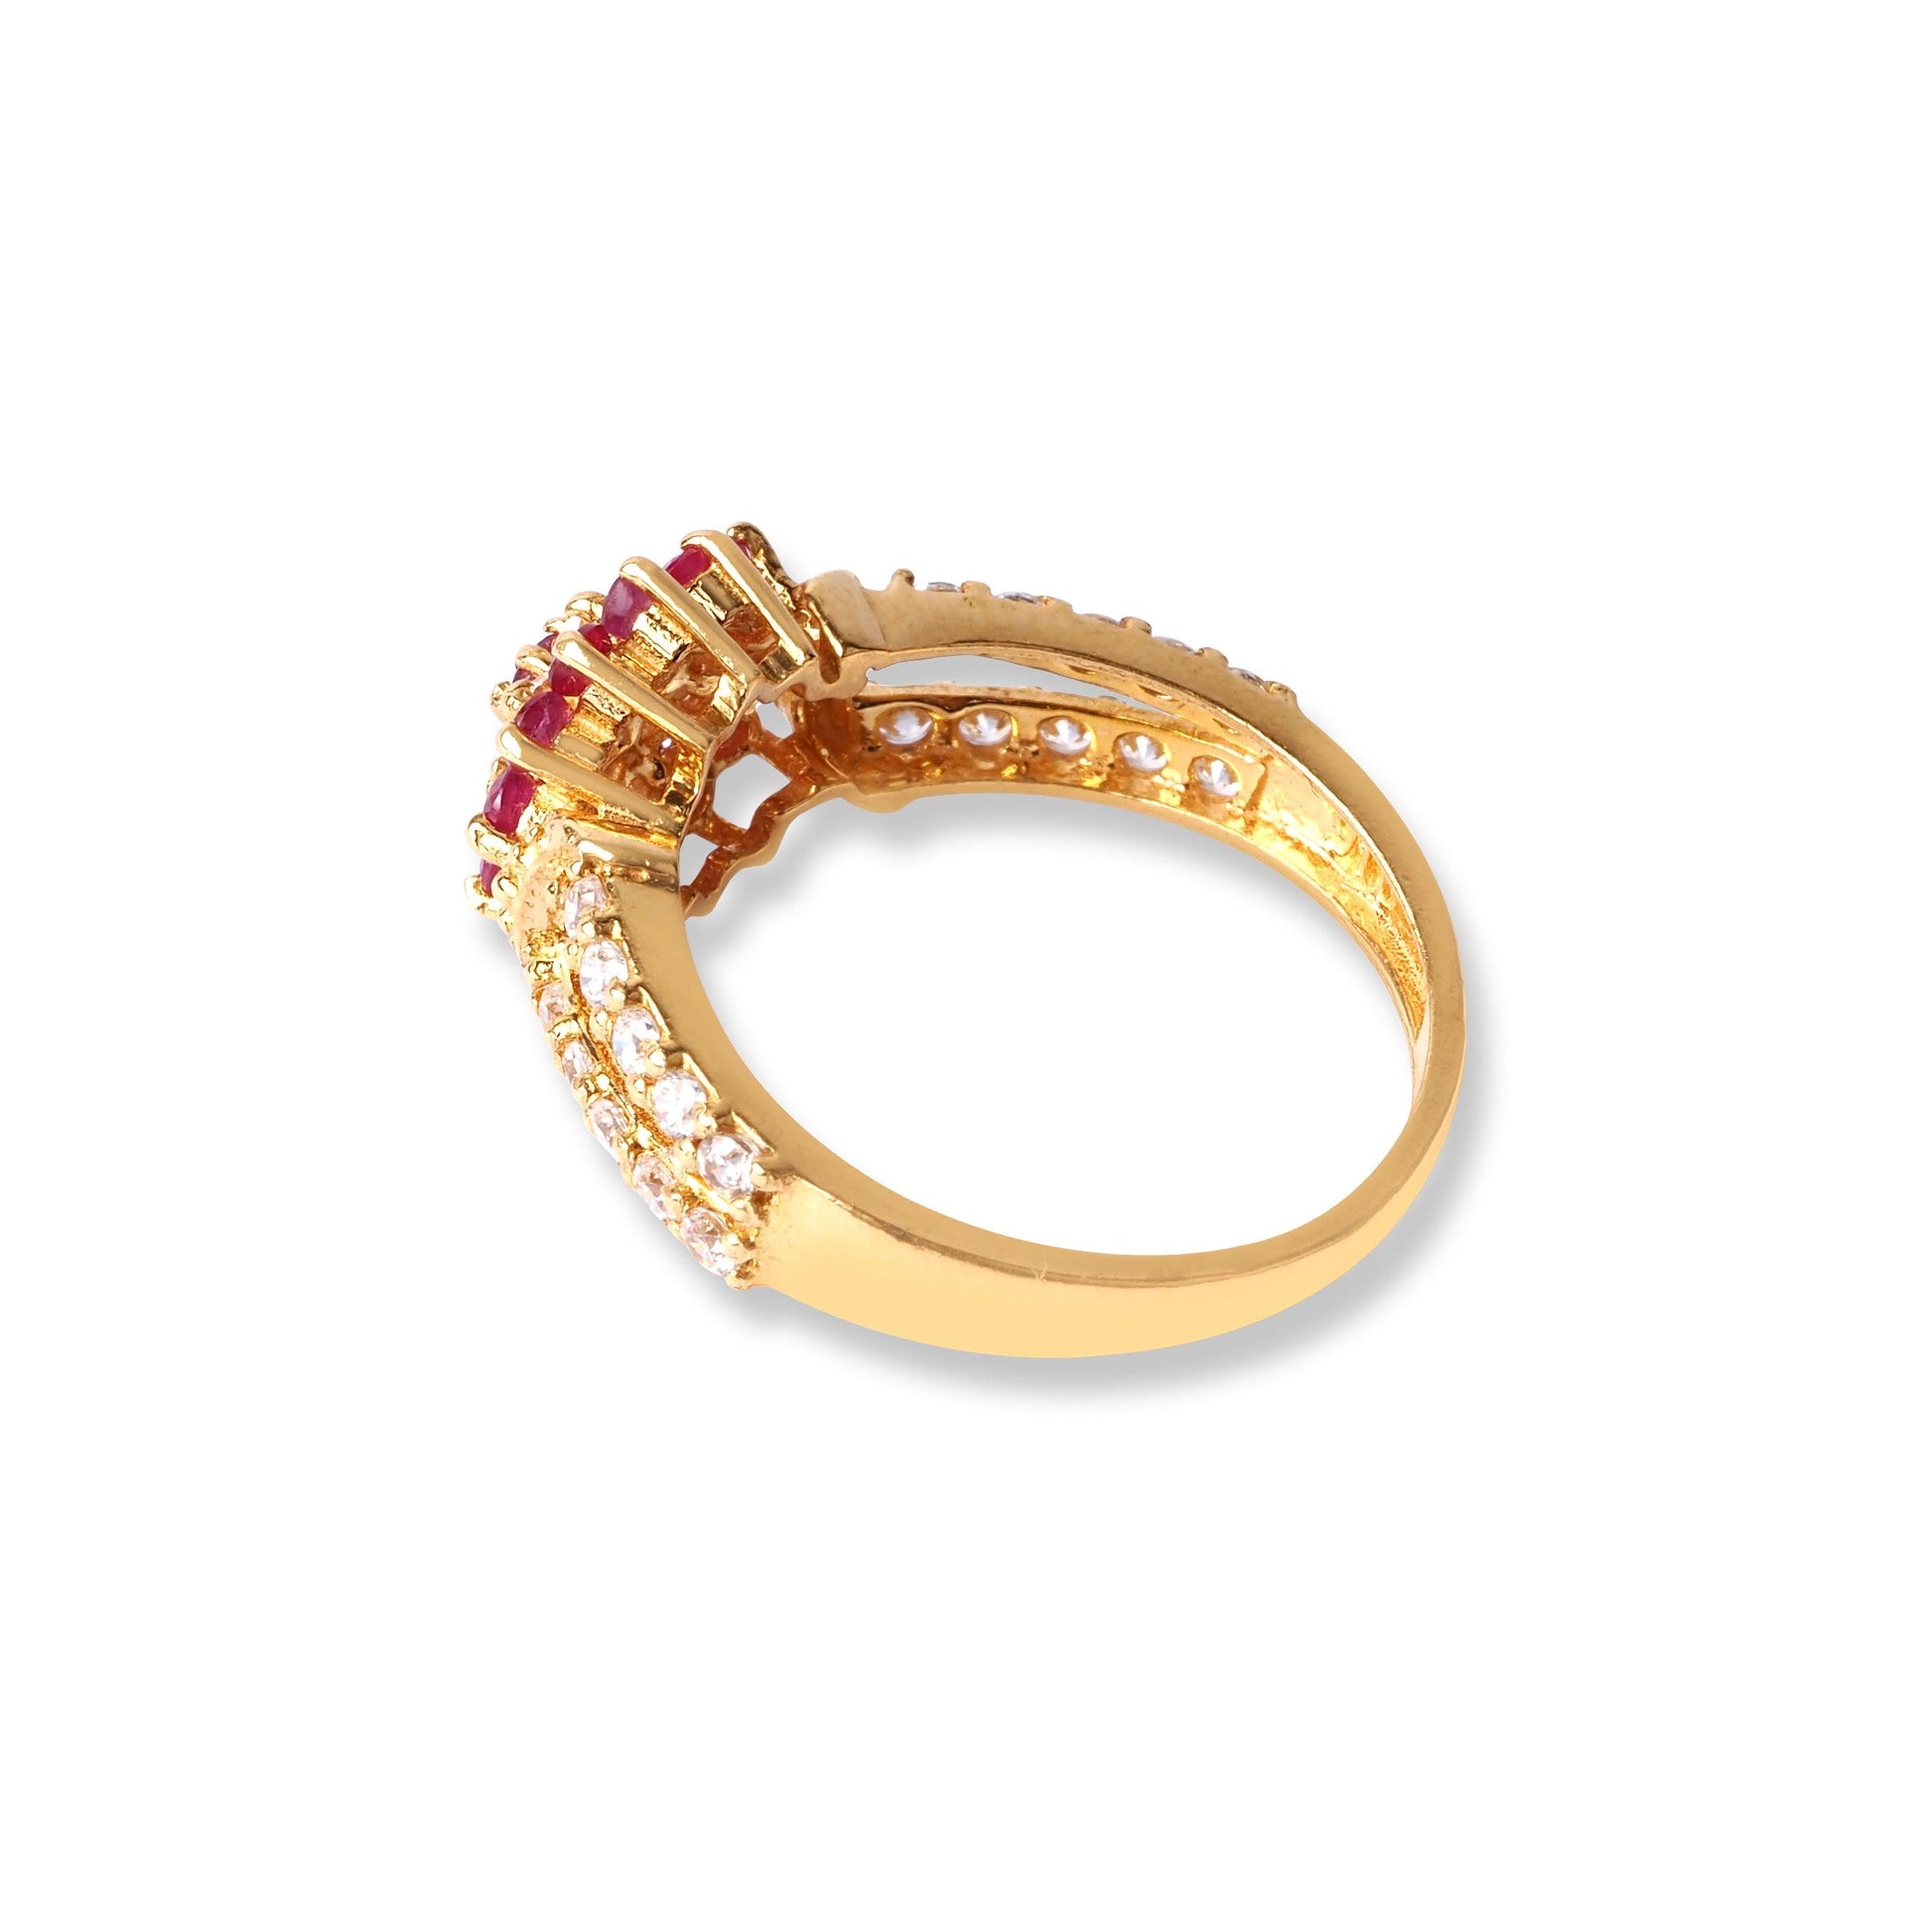 22ct Gold Red & White Cubic Zirconia Dress Ring (3.5g) LR-6582 - Minar Jewellers